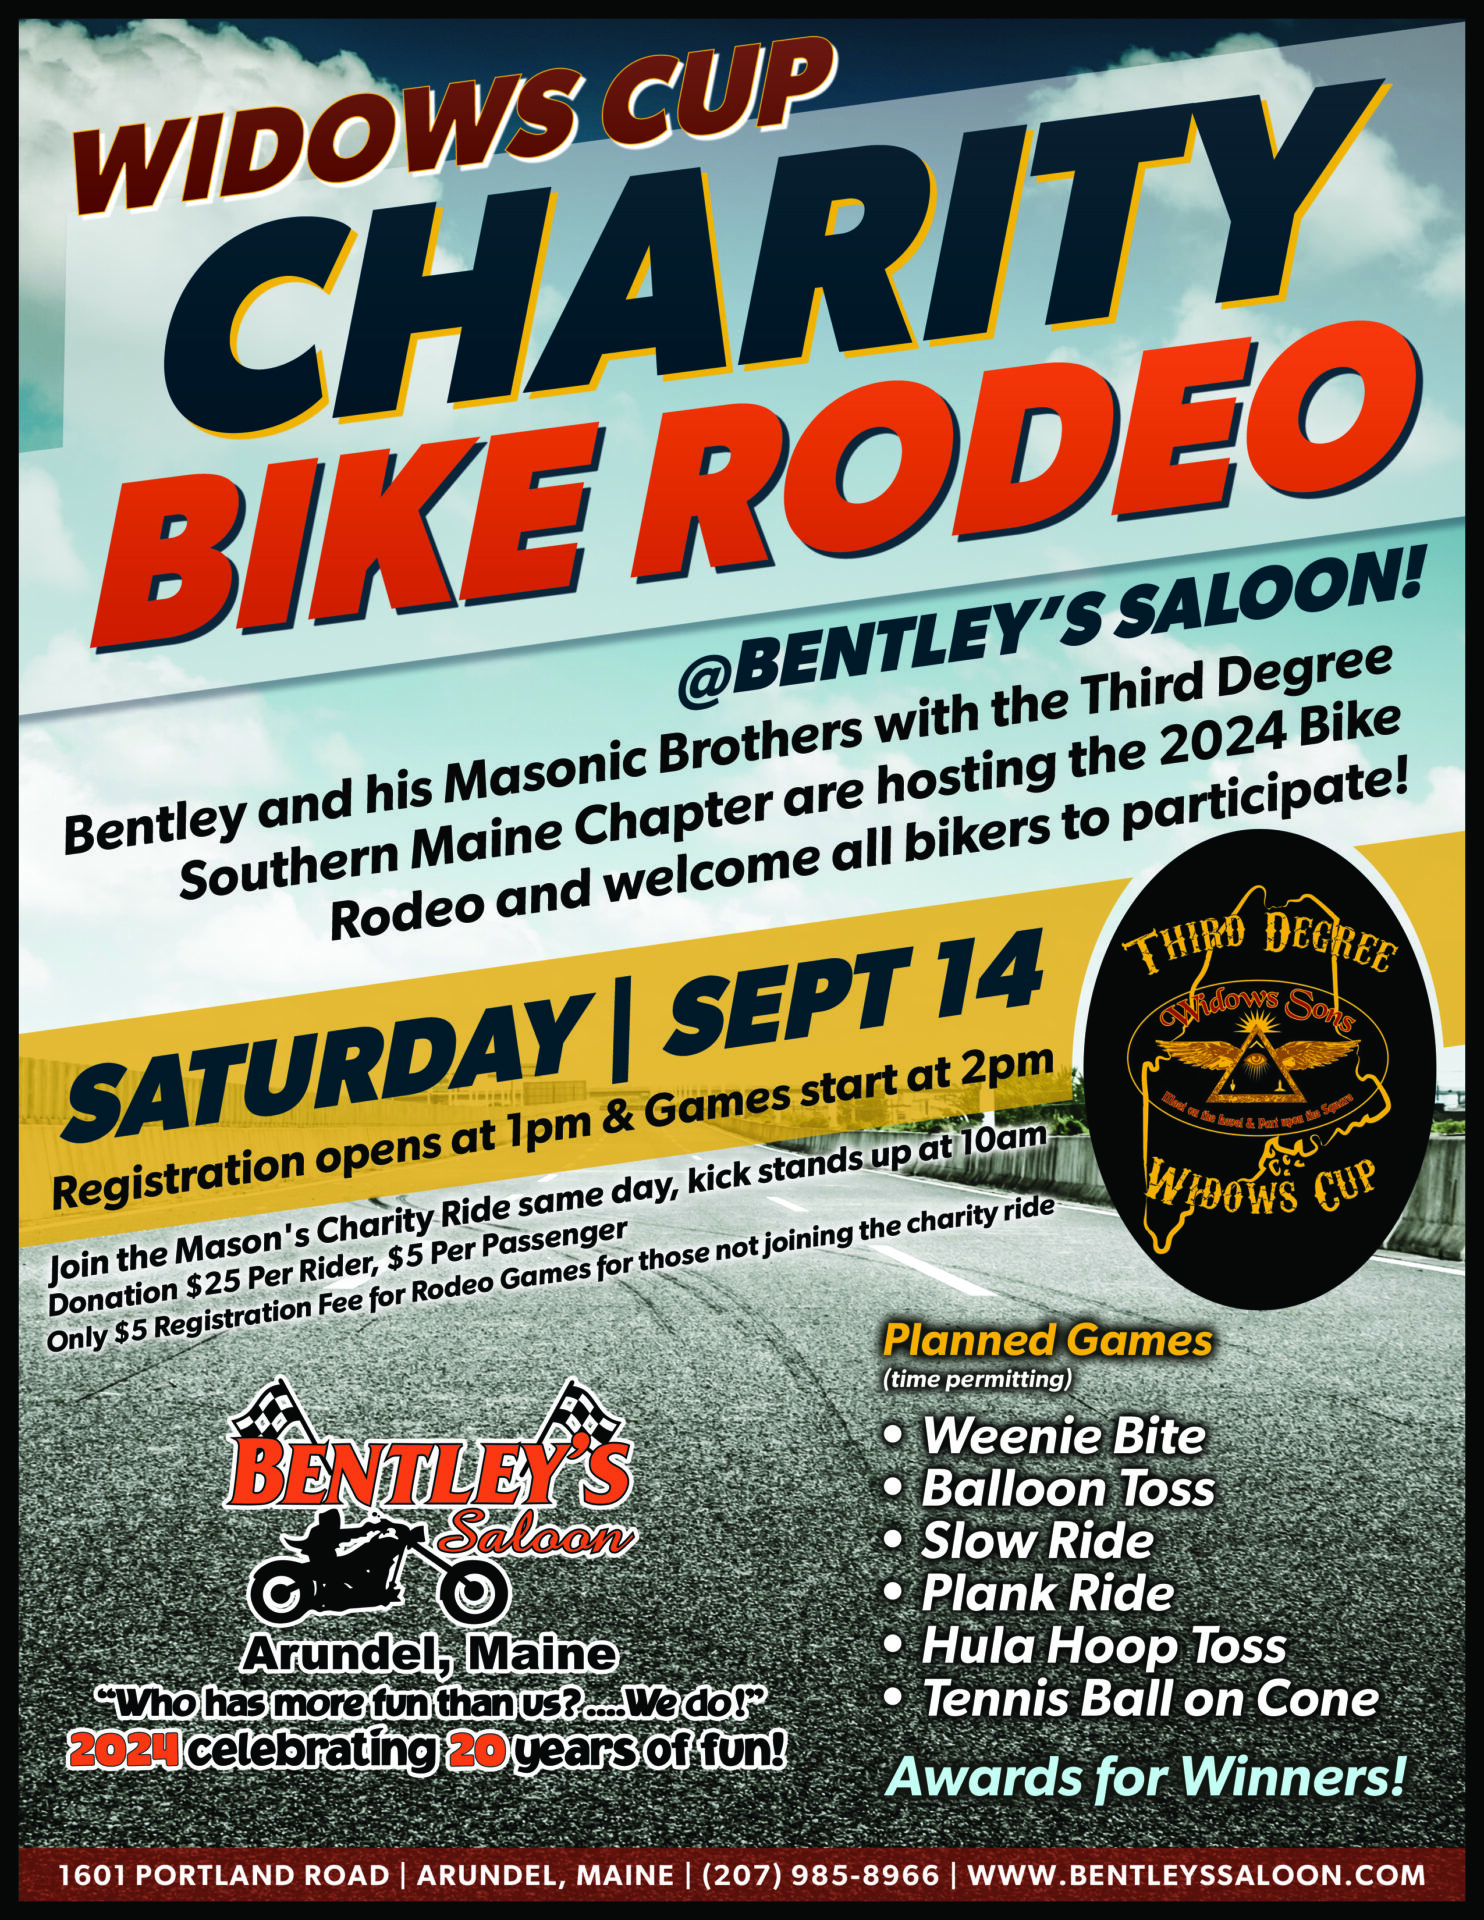 A poster for the charity bike rodeo.